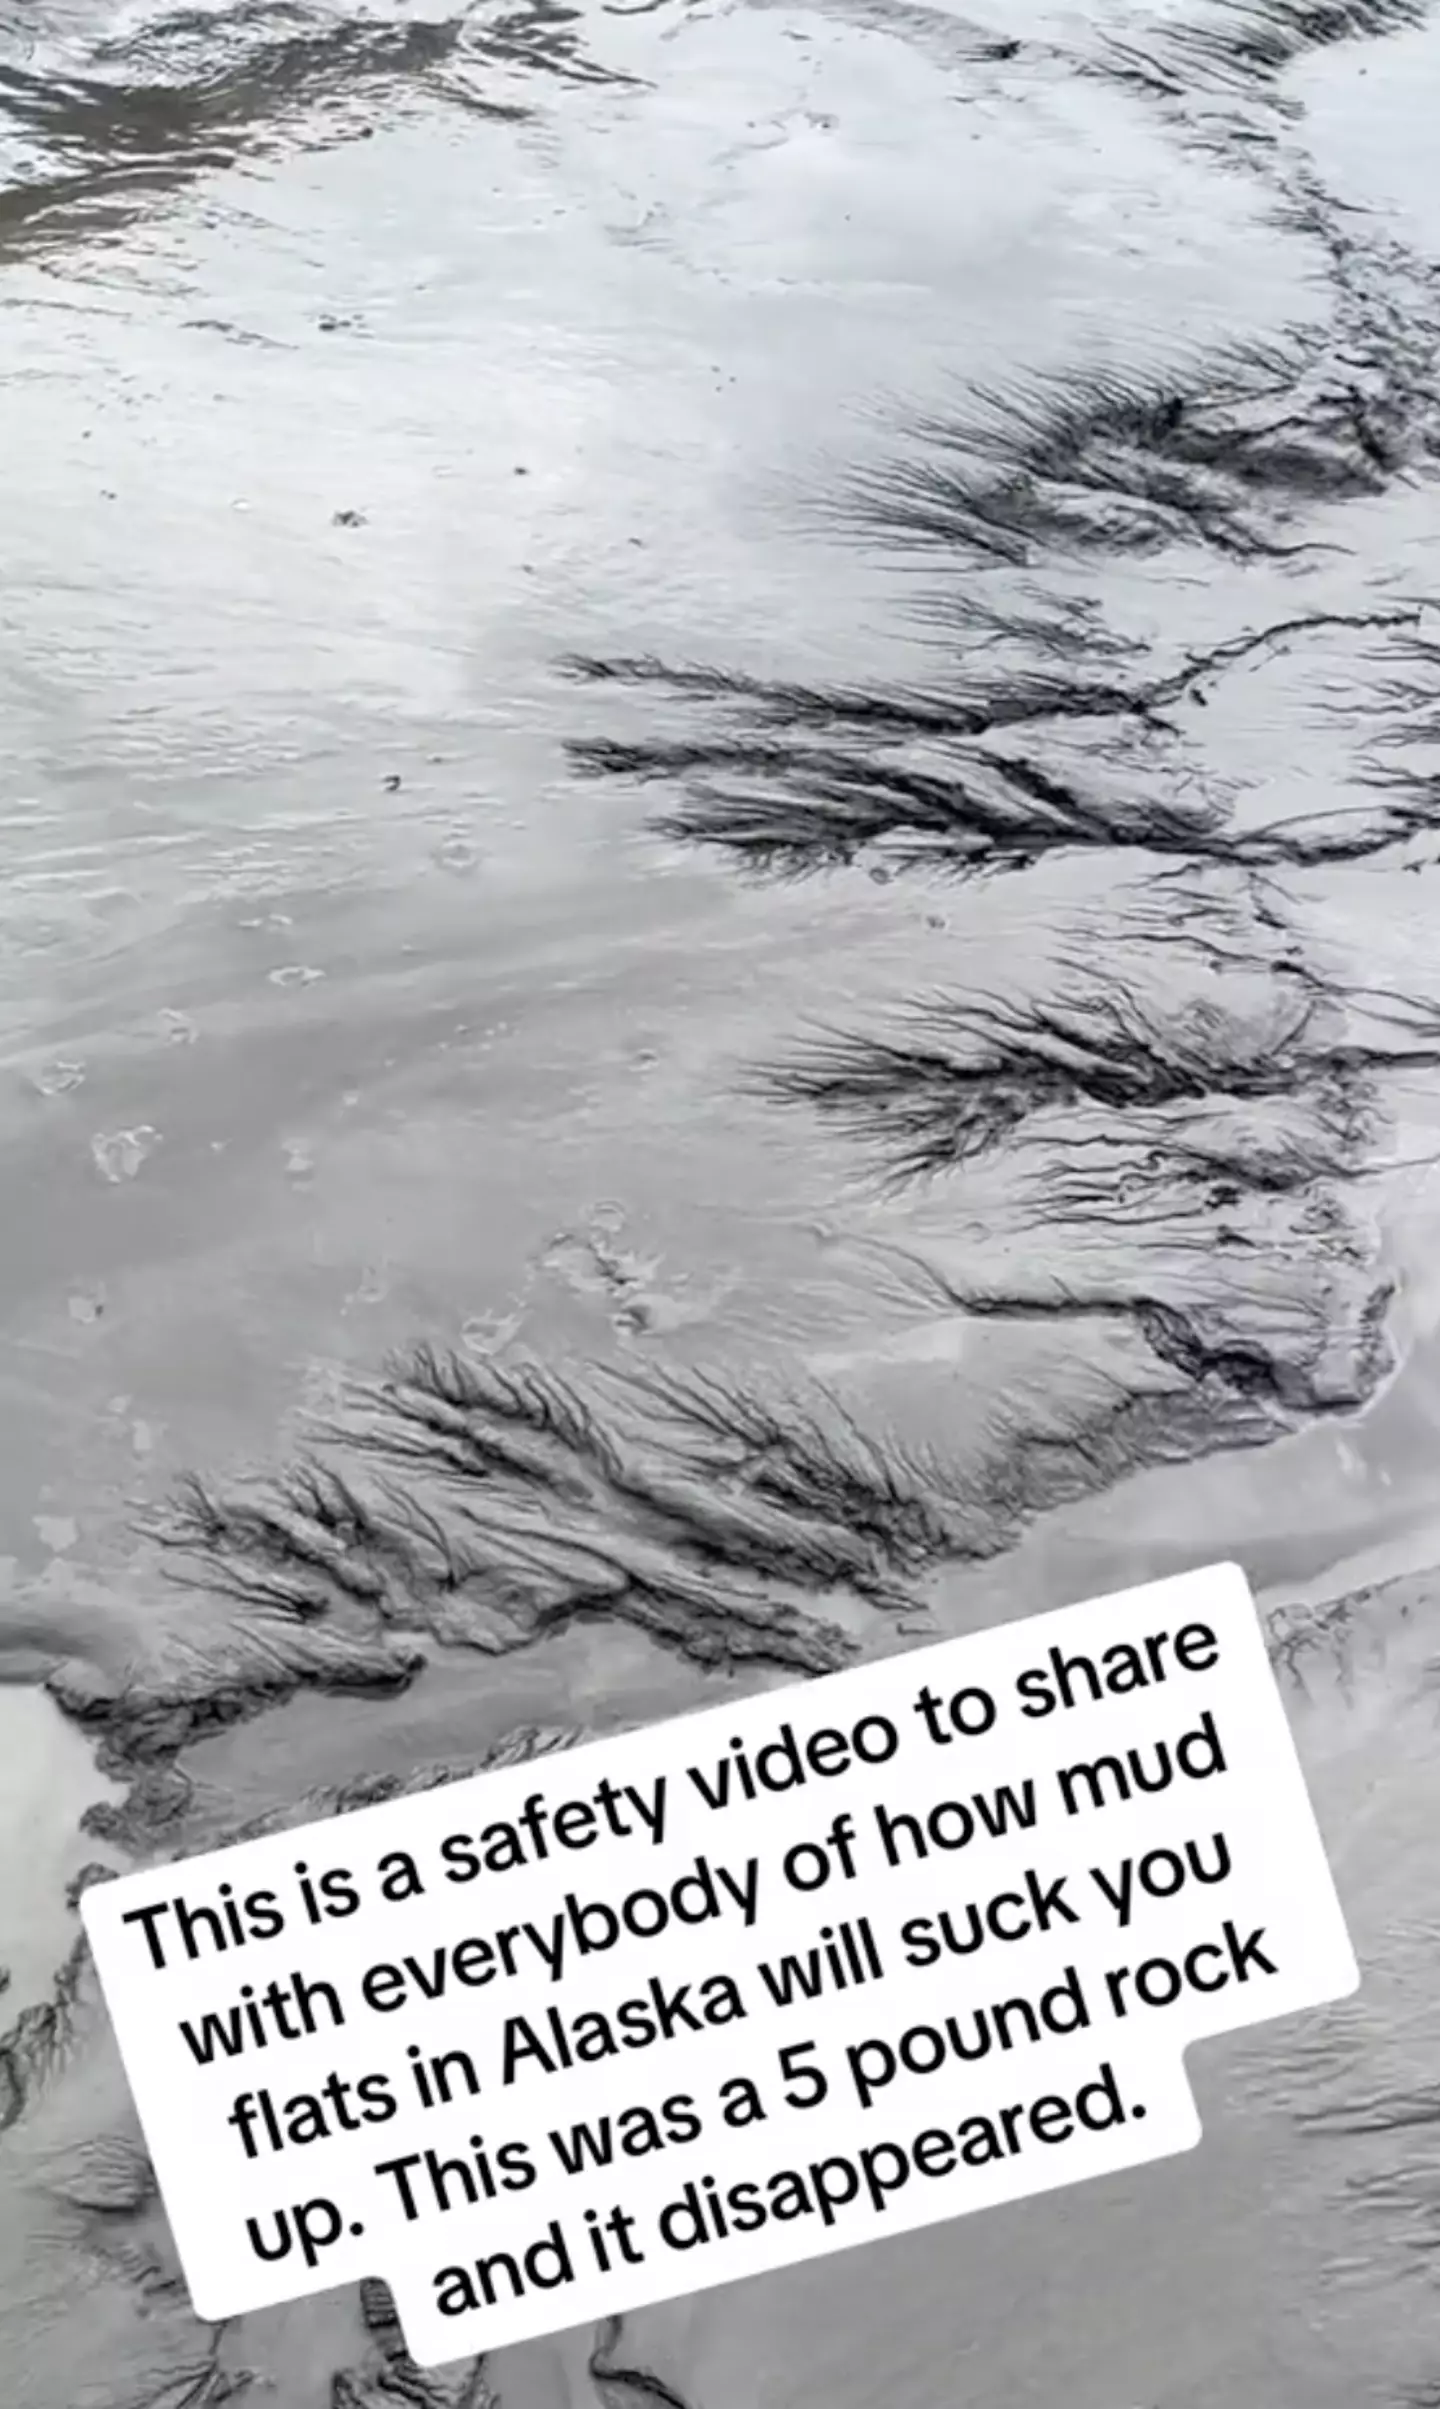 A man has spoken about the dangers of mudflats.